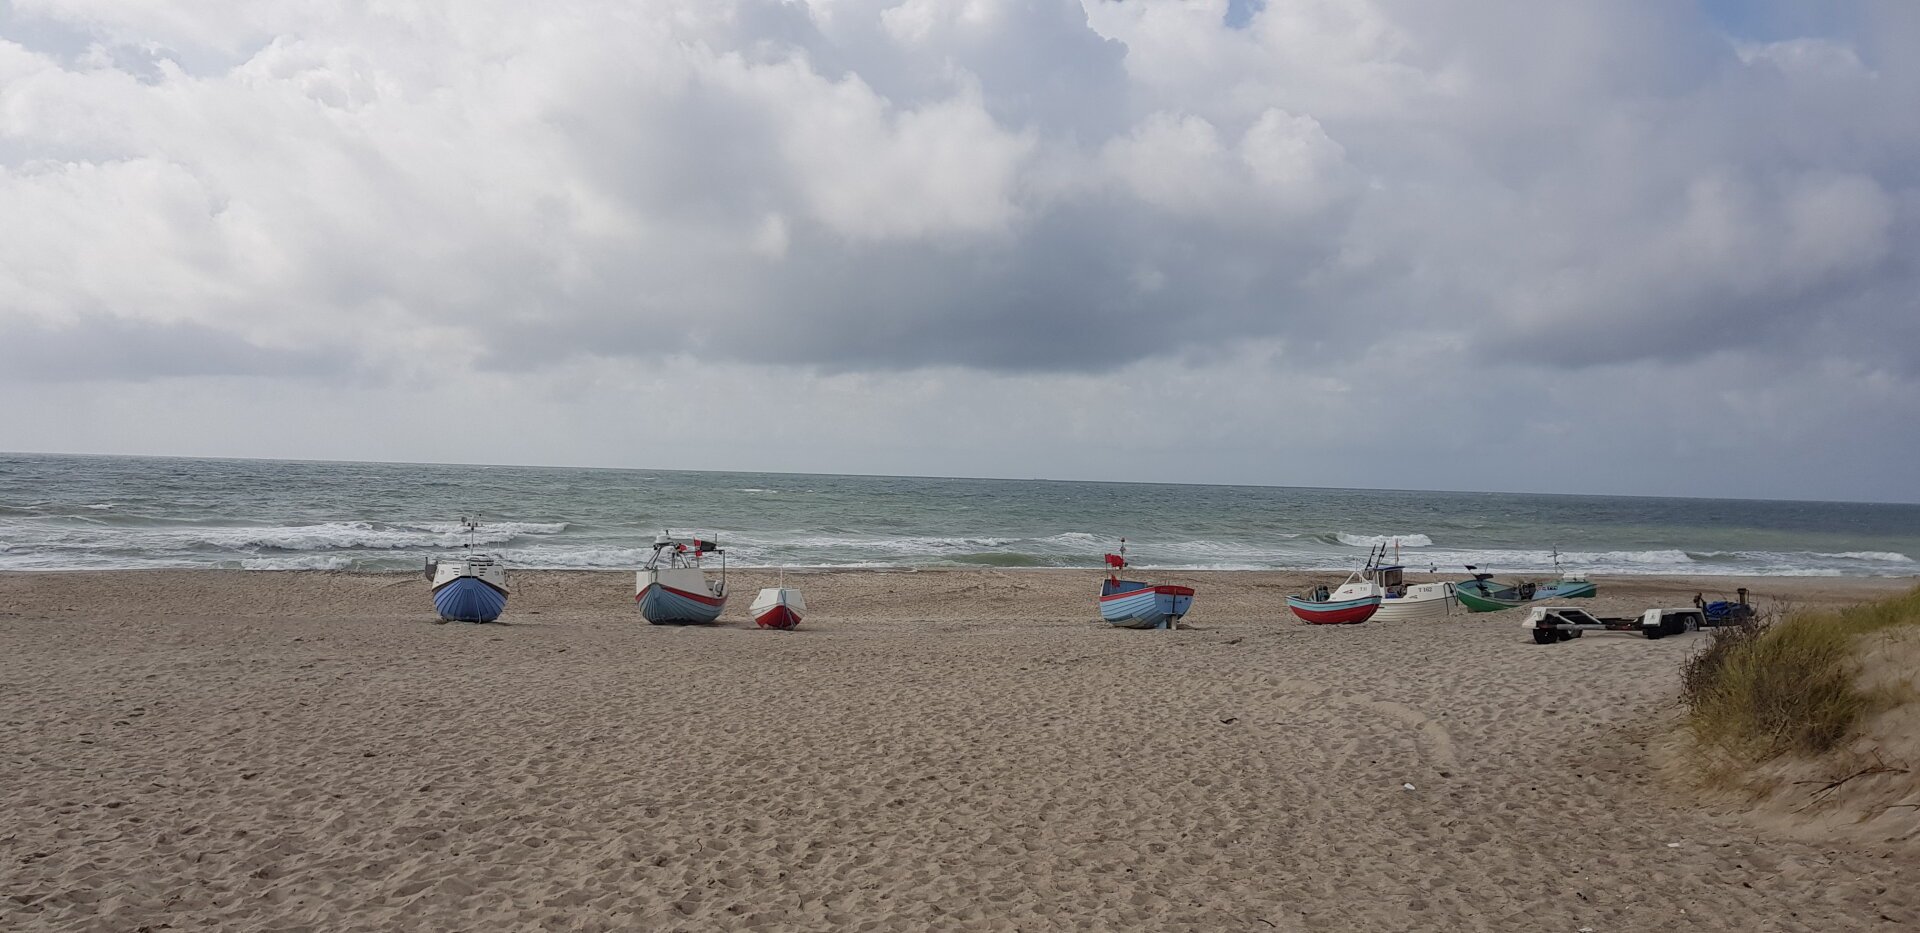 Sandy beach with small fishing boats. The boats have been drawn up on the beach.